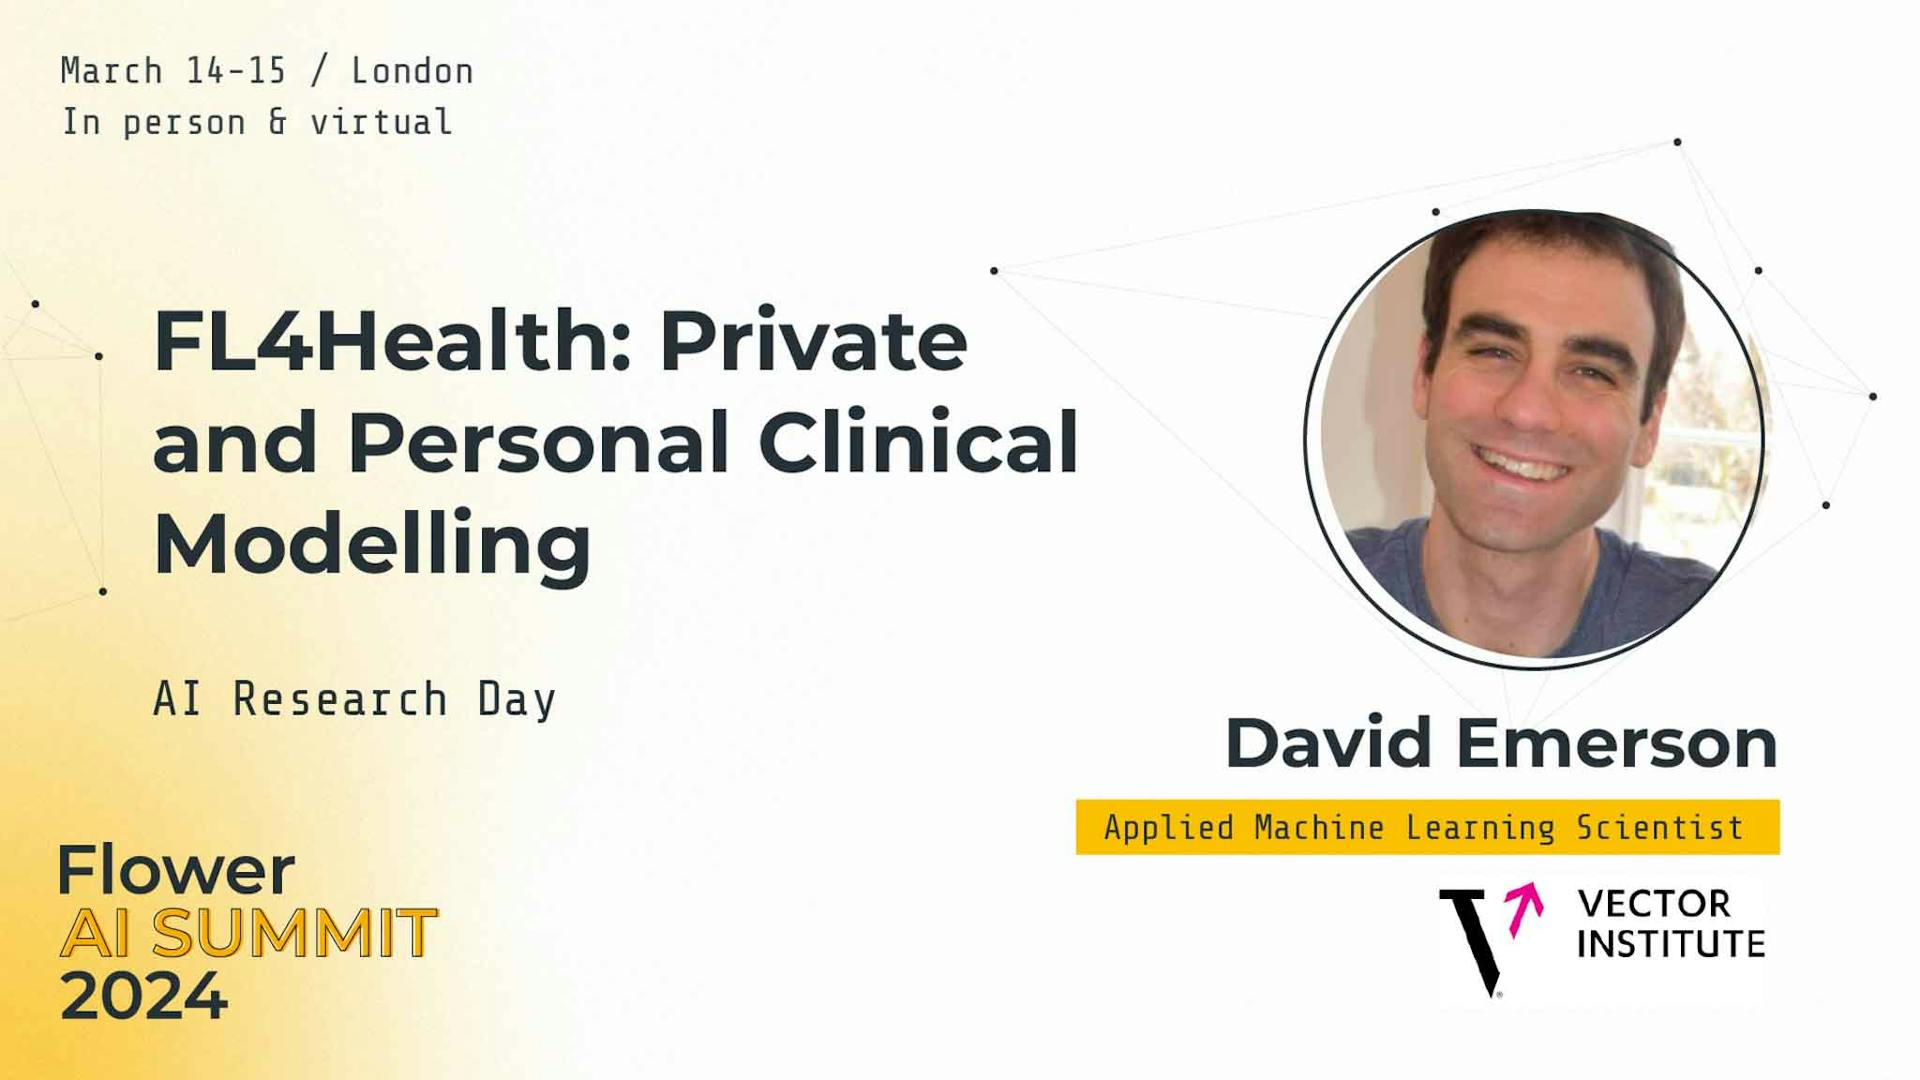 FL4Health: Private and Personal Clinical Modelling, by David Emerson